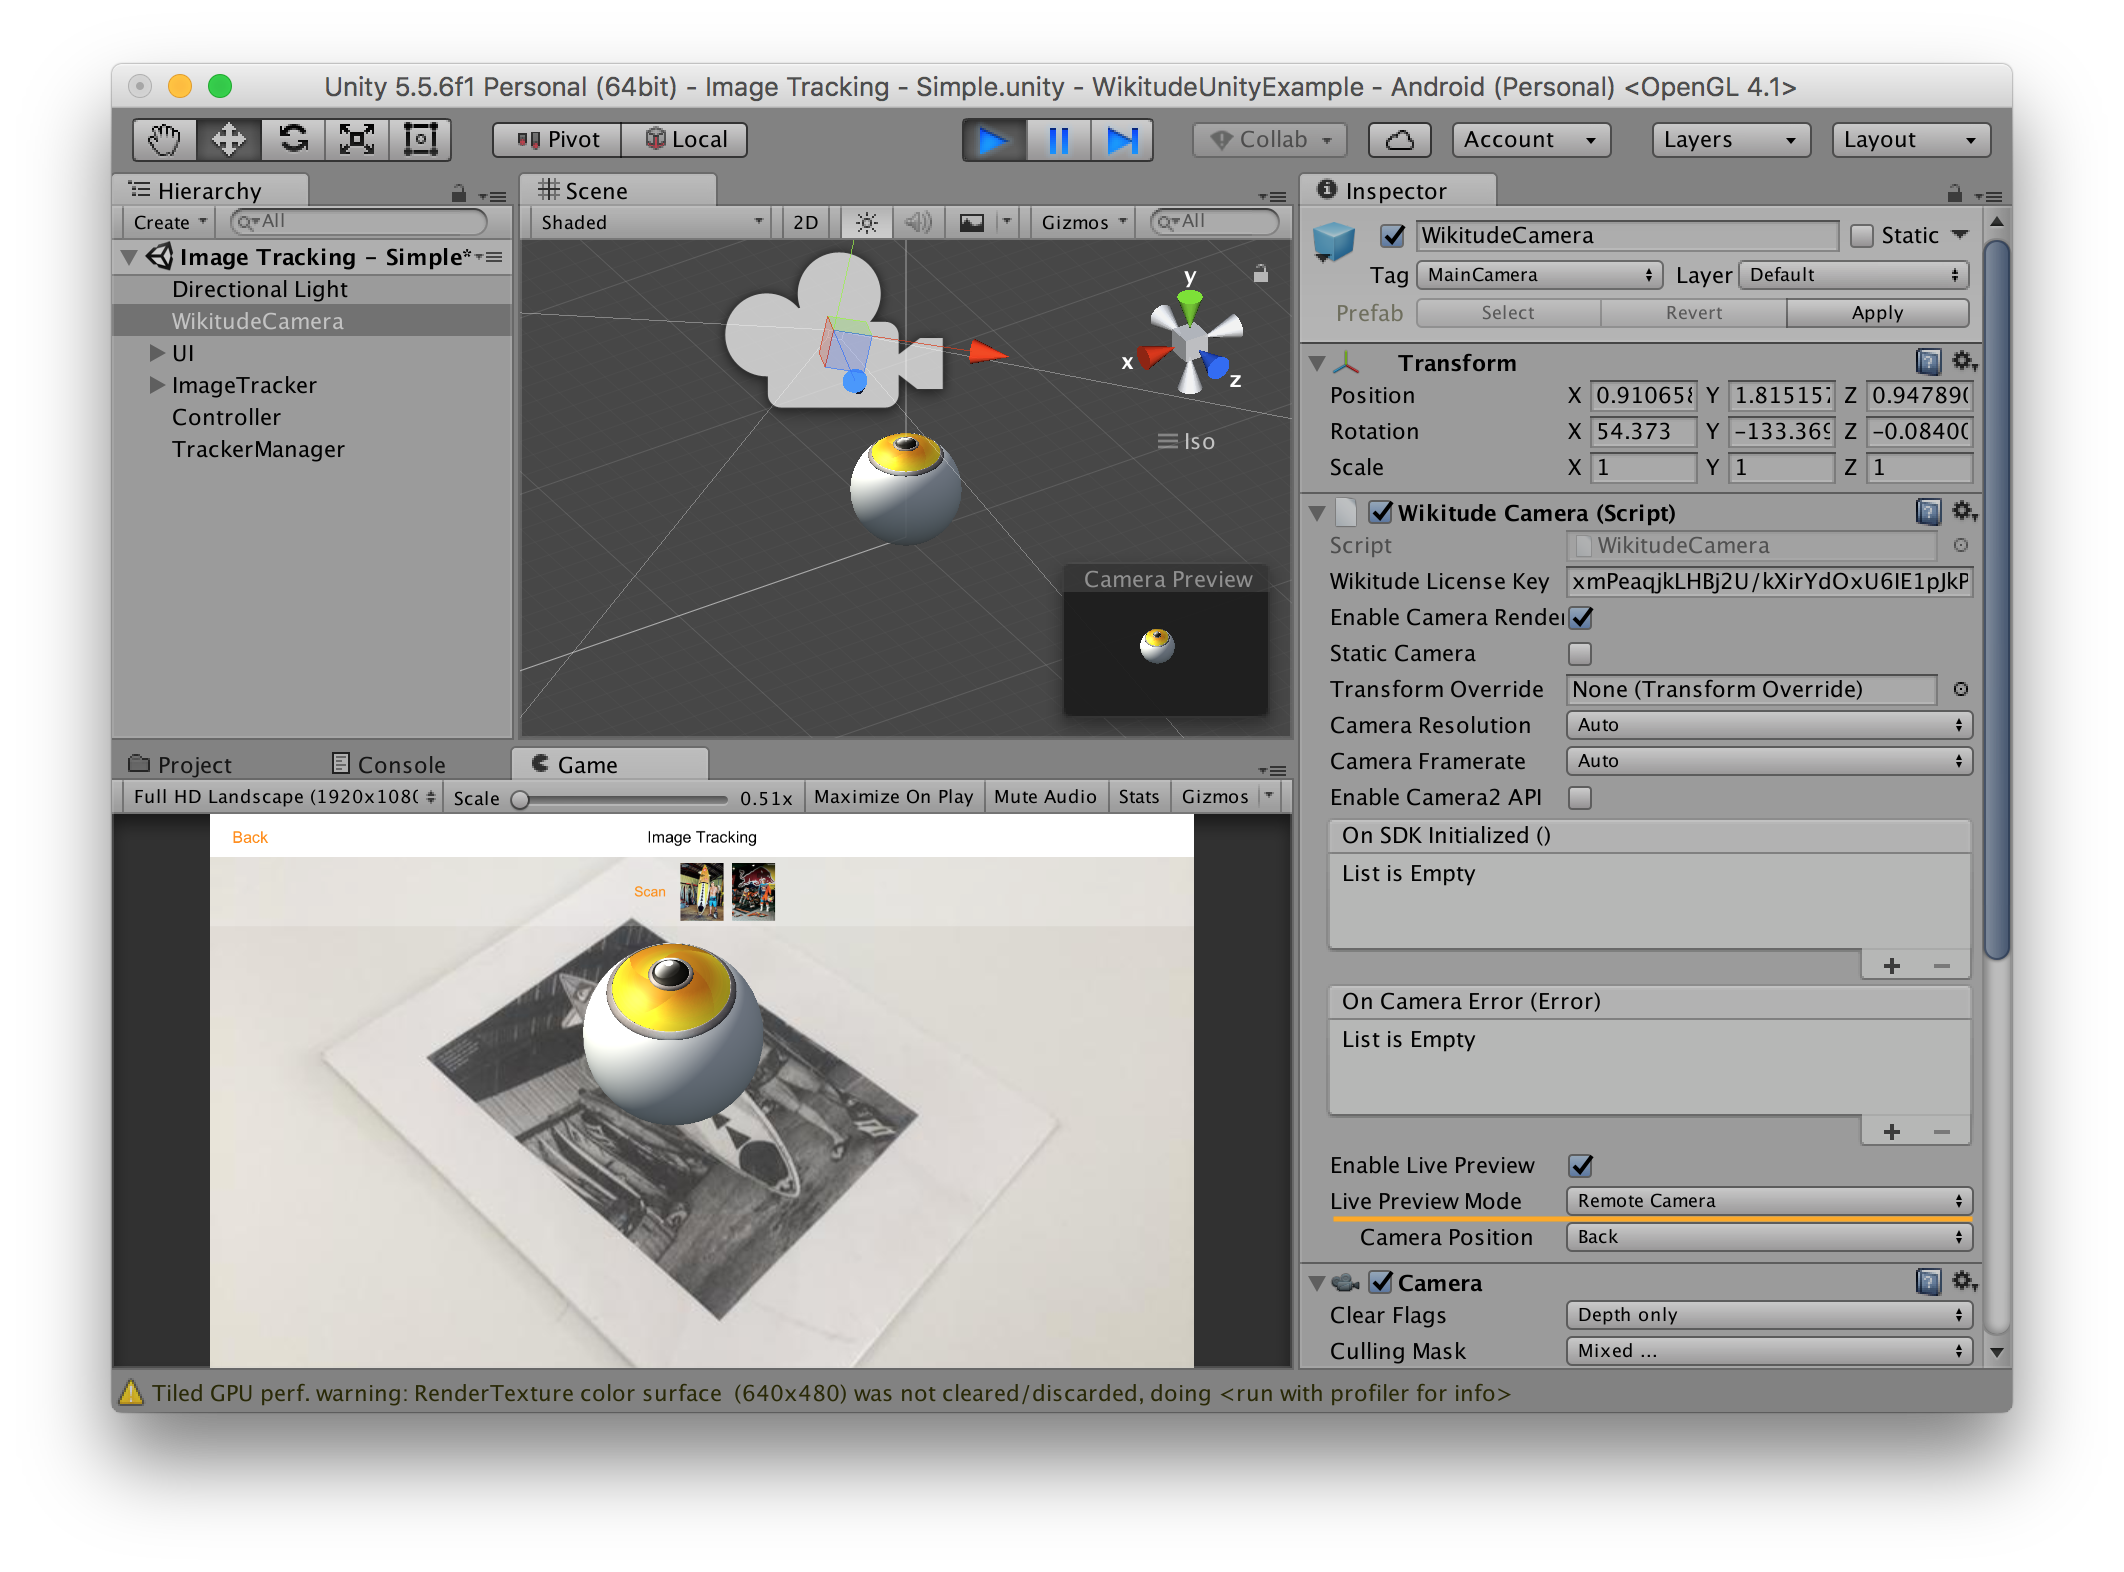 Image tracking in the Editor using the Unity Remote App